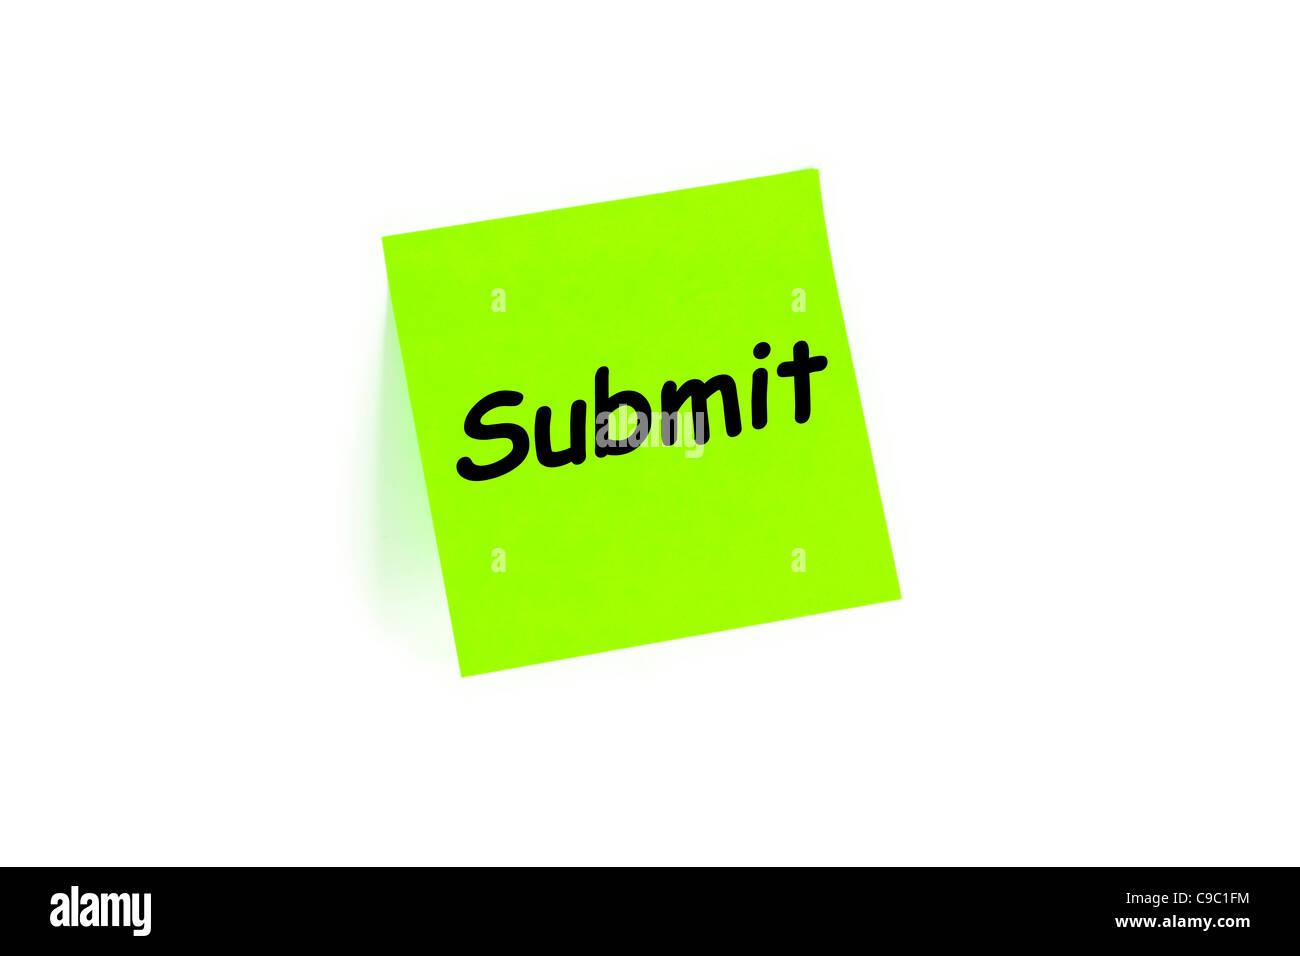 Submit Concept On A Note Isolated On Whtie Stock Photo